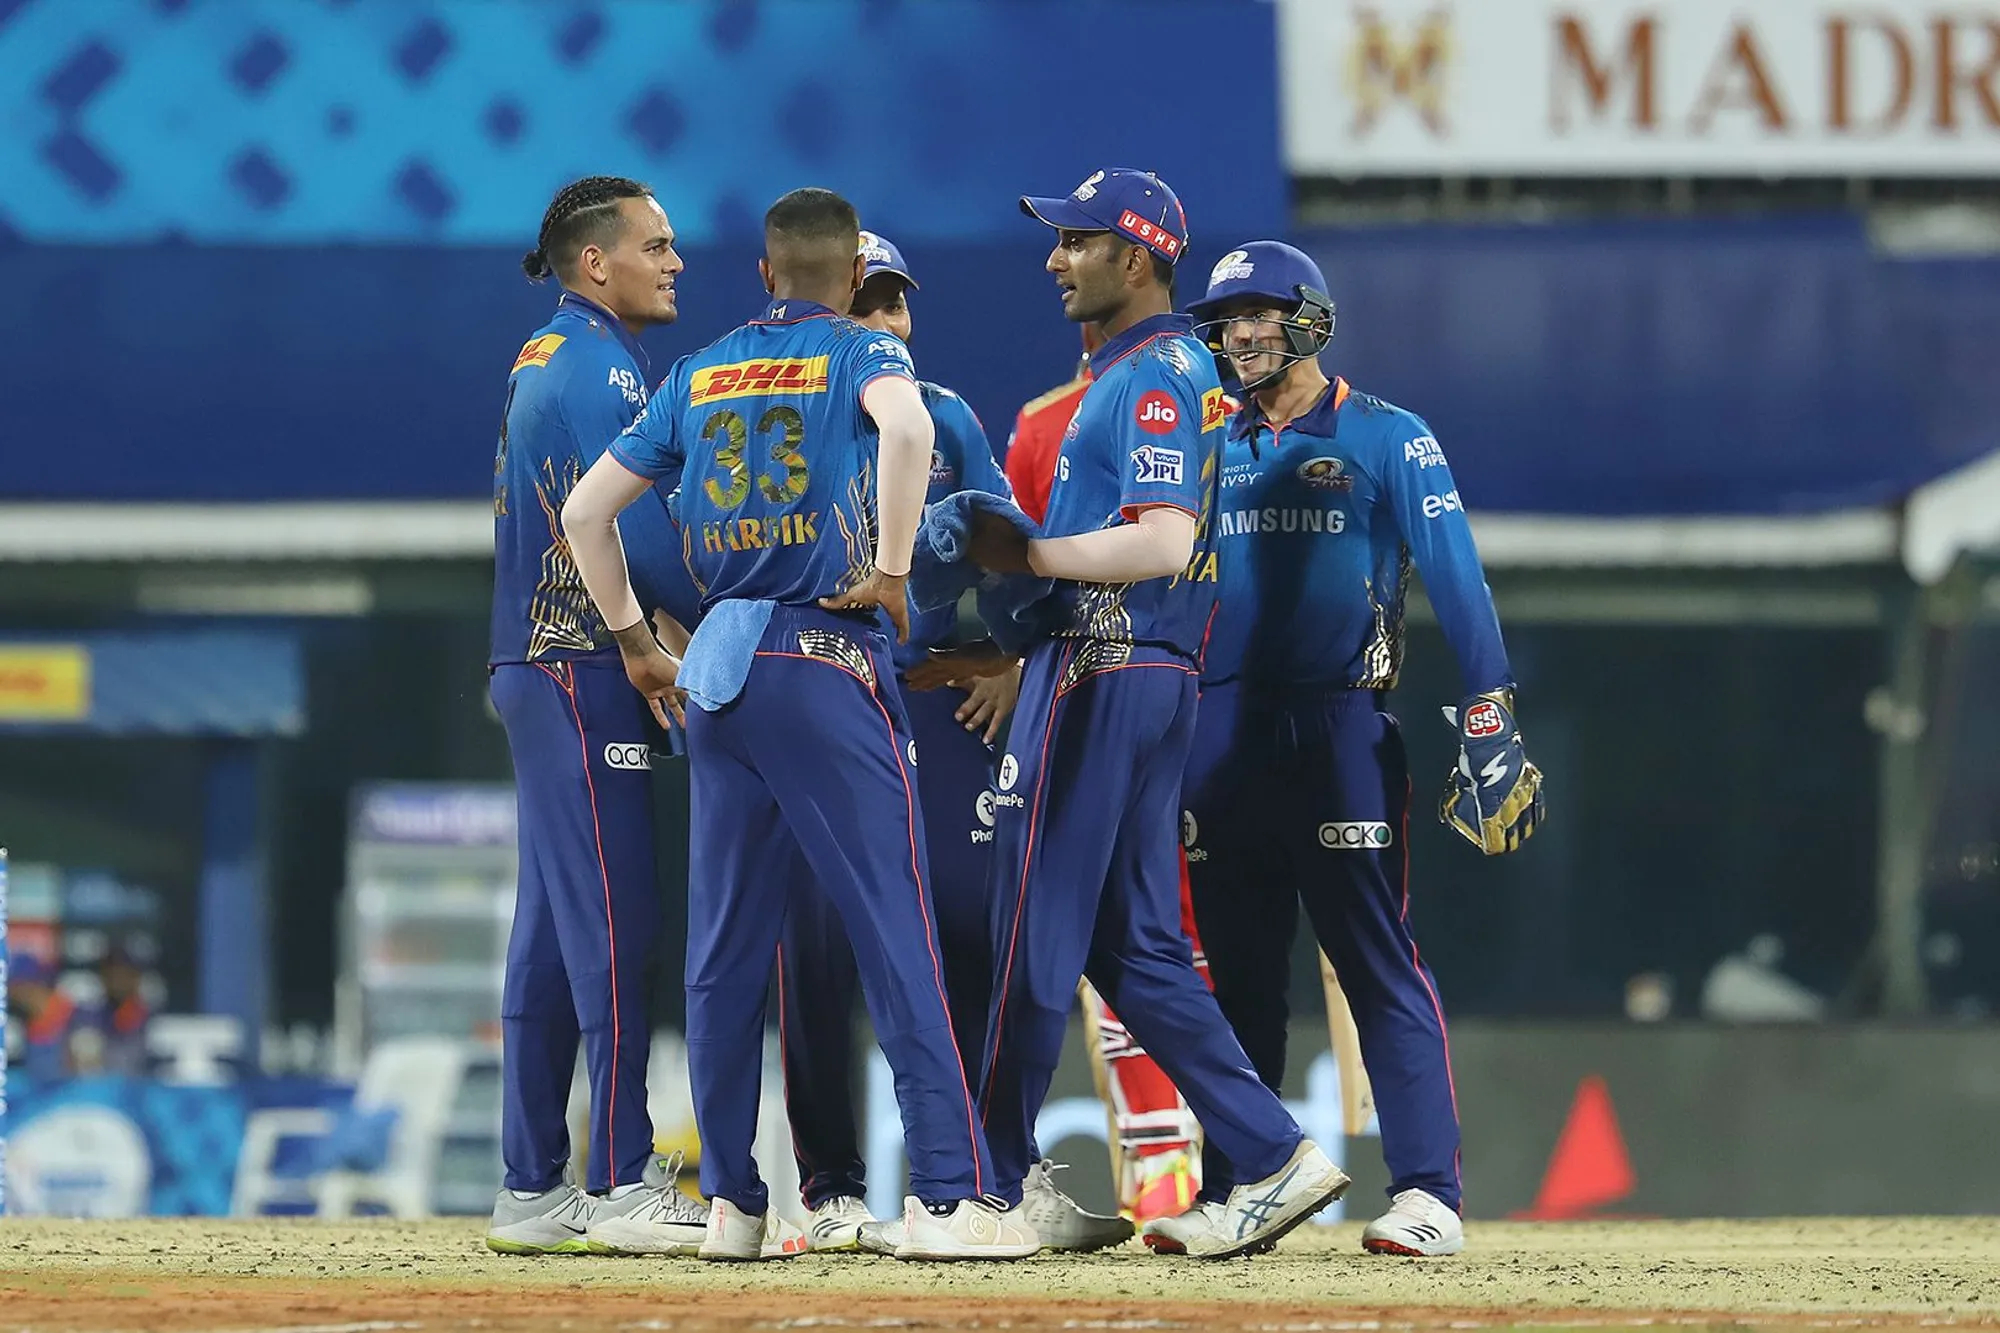 Mumbai Indians need to win this match to stay in contention for playoffs | BCCI-IPL